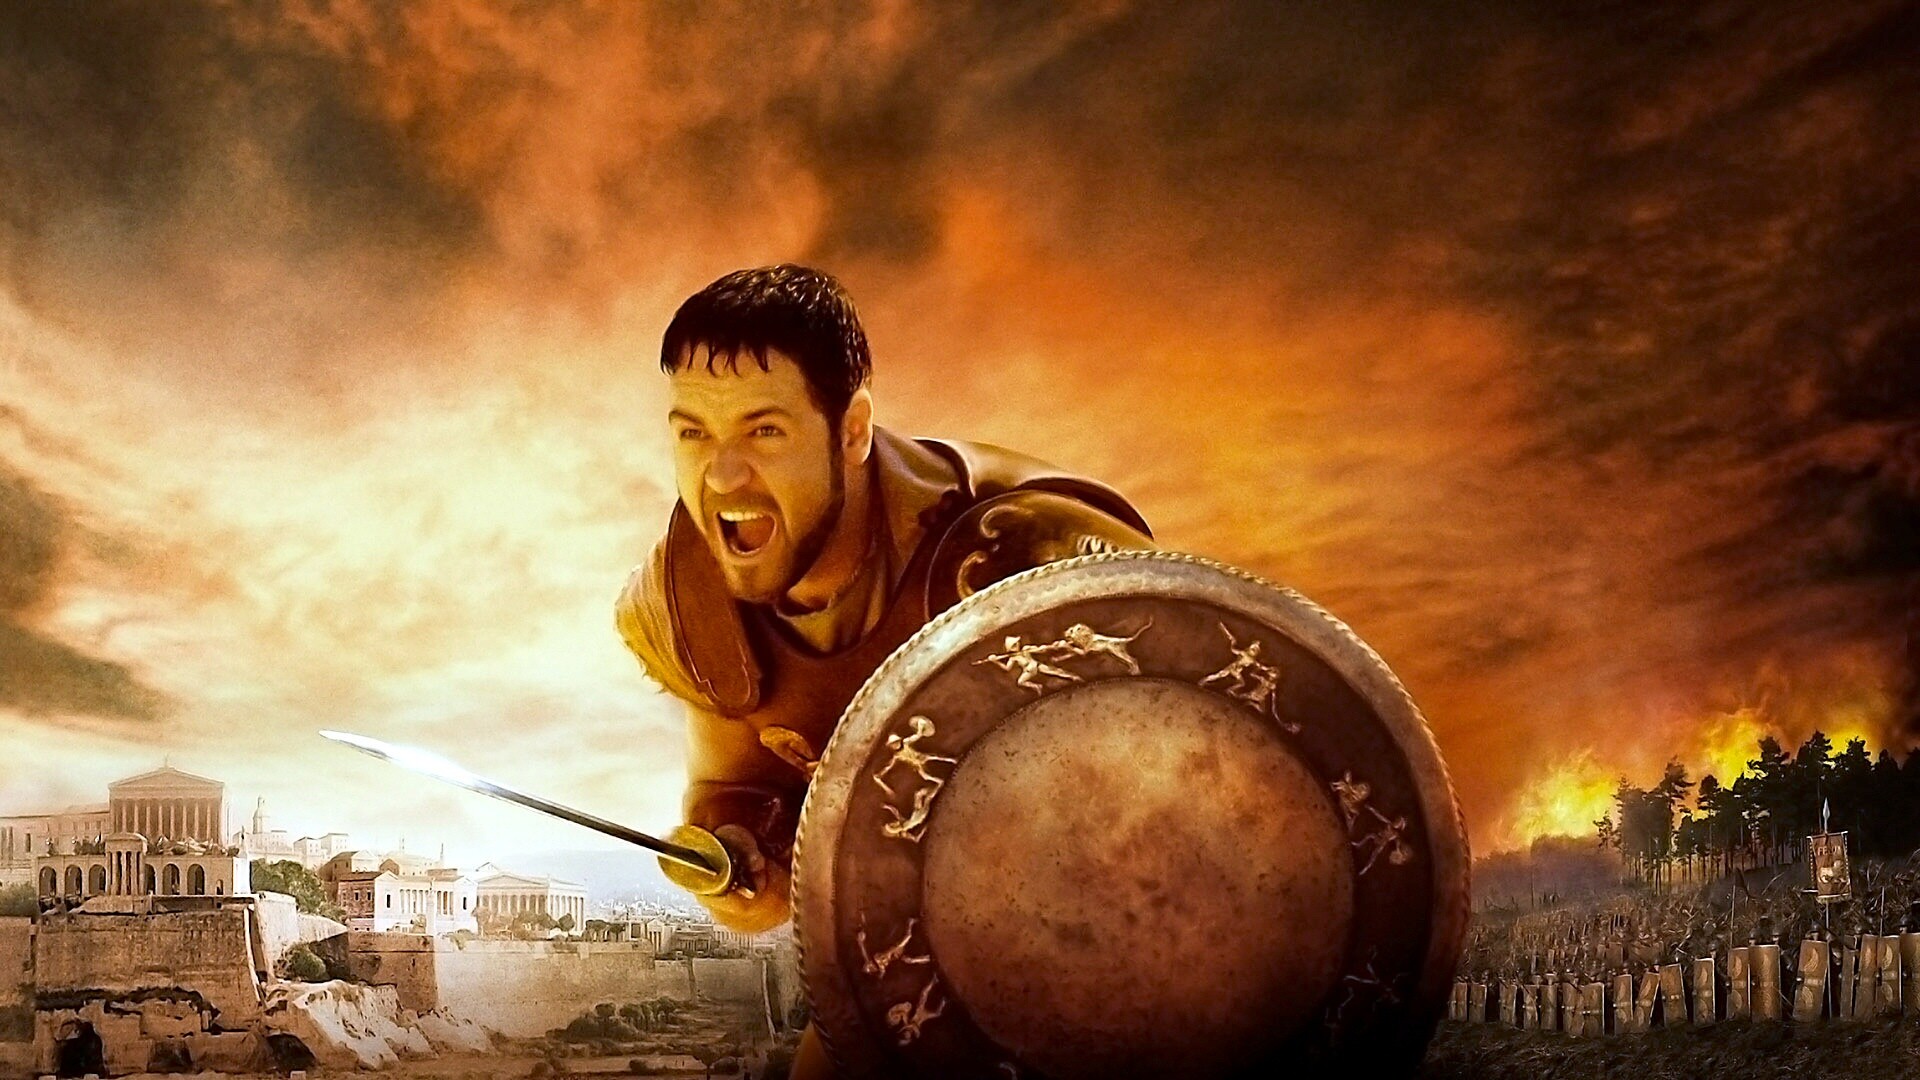 Gladiator: The epic historical film, Starring Russell Crowe. 1920x1080 Full HD Wallpaper.